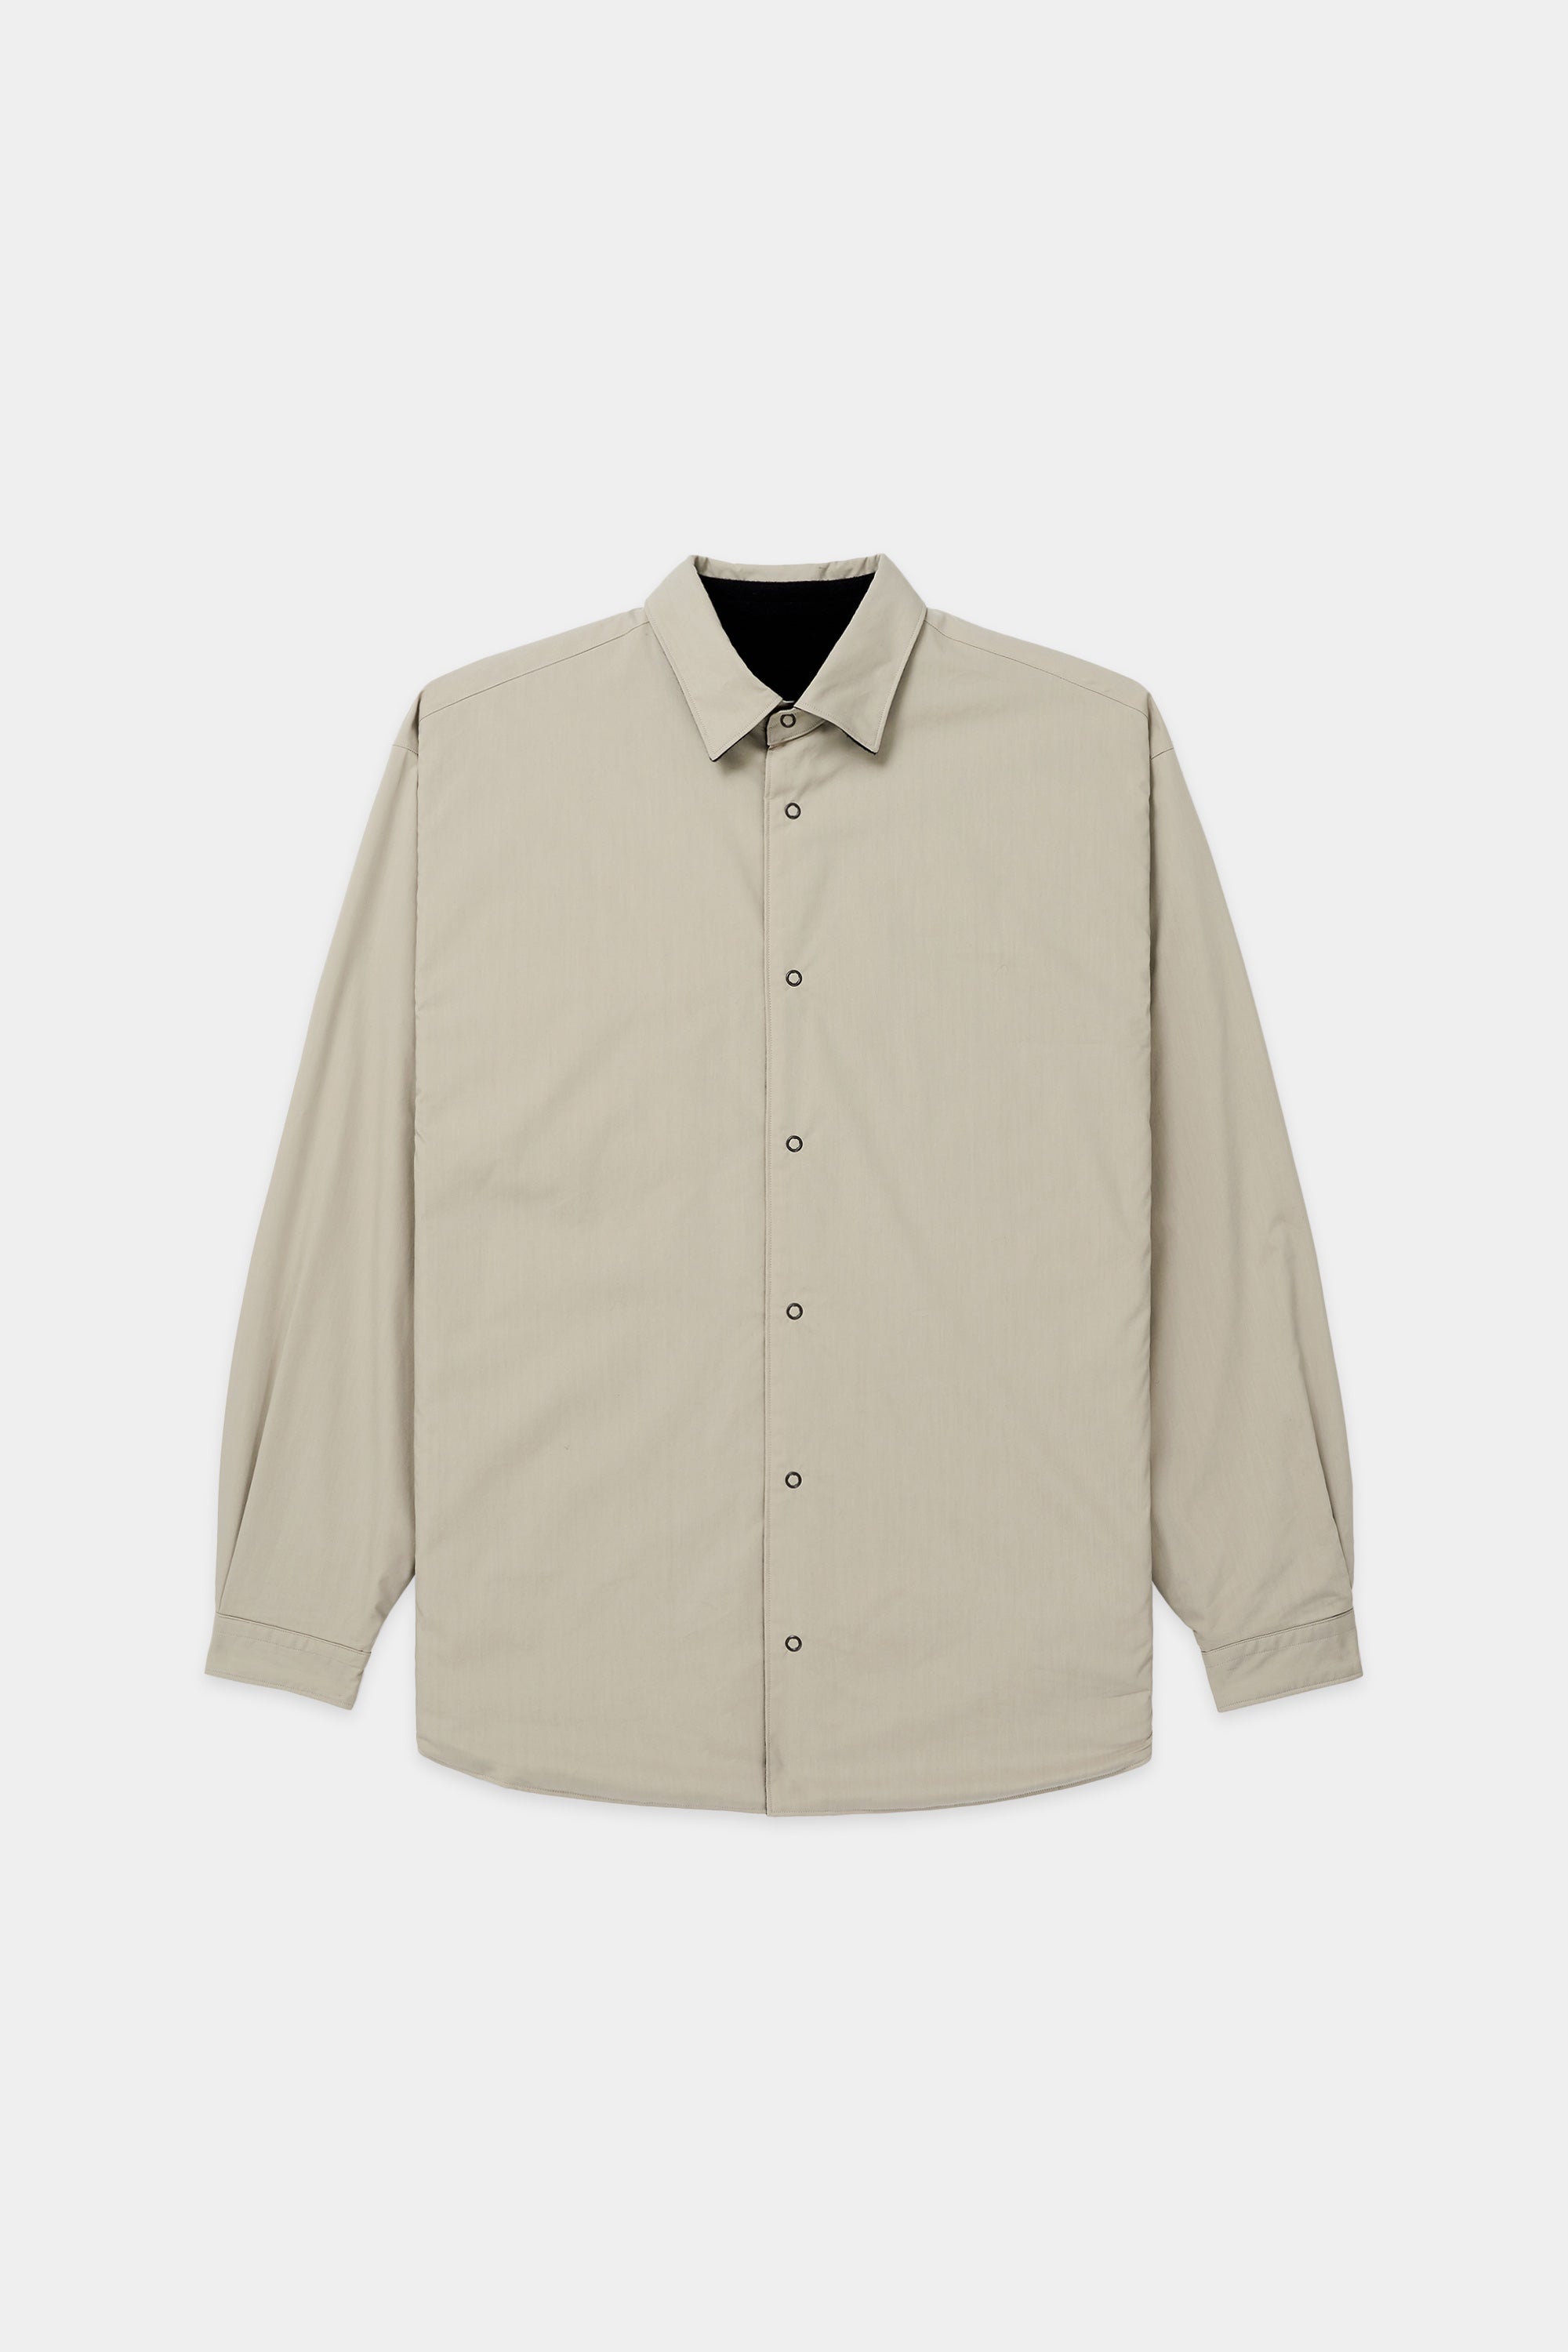 Organic Cotton/ Polyester Weather Reversible Shirt, Beige